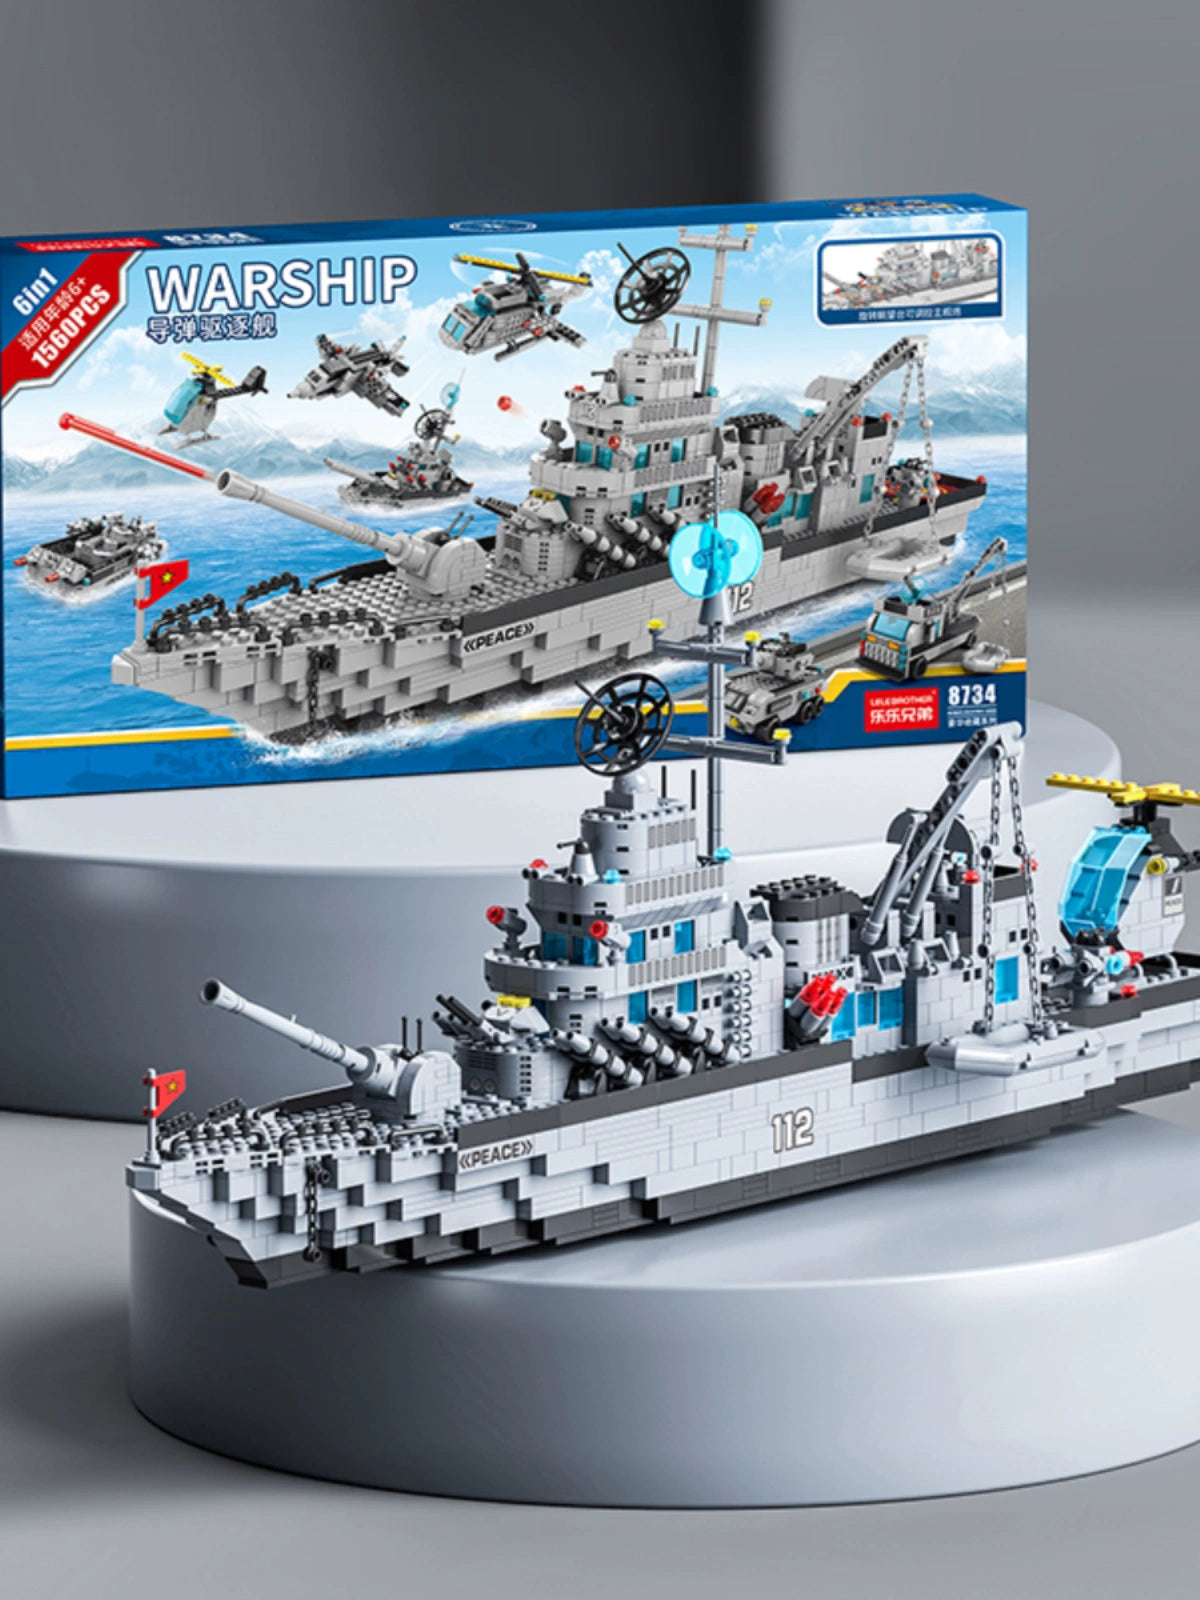 LELE Brothers Naval Brick Models - Diverse Range from Aircraft Carriers to Battleships, Compatible with Lego